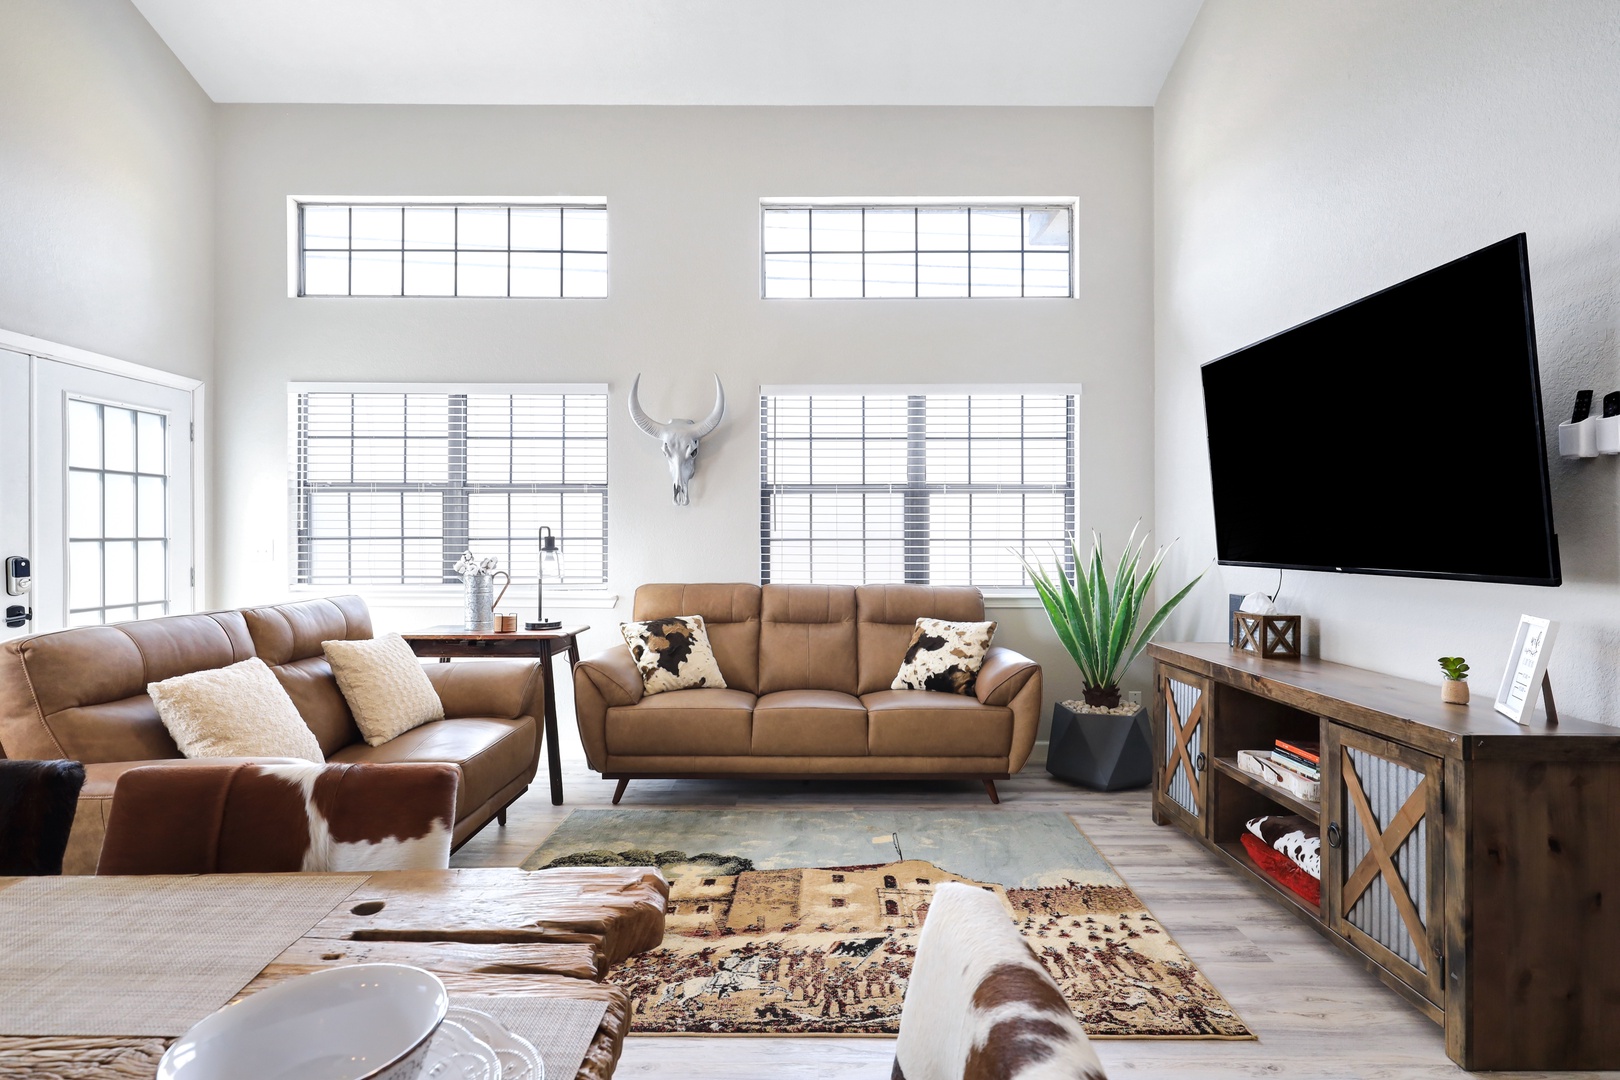 Curl up in the inviting living room & stream all your favorite entertainment